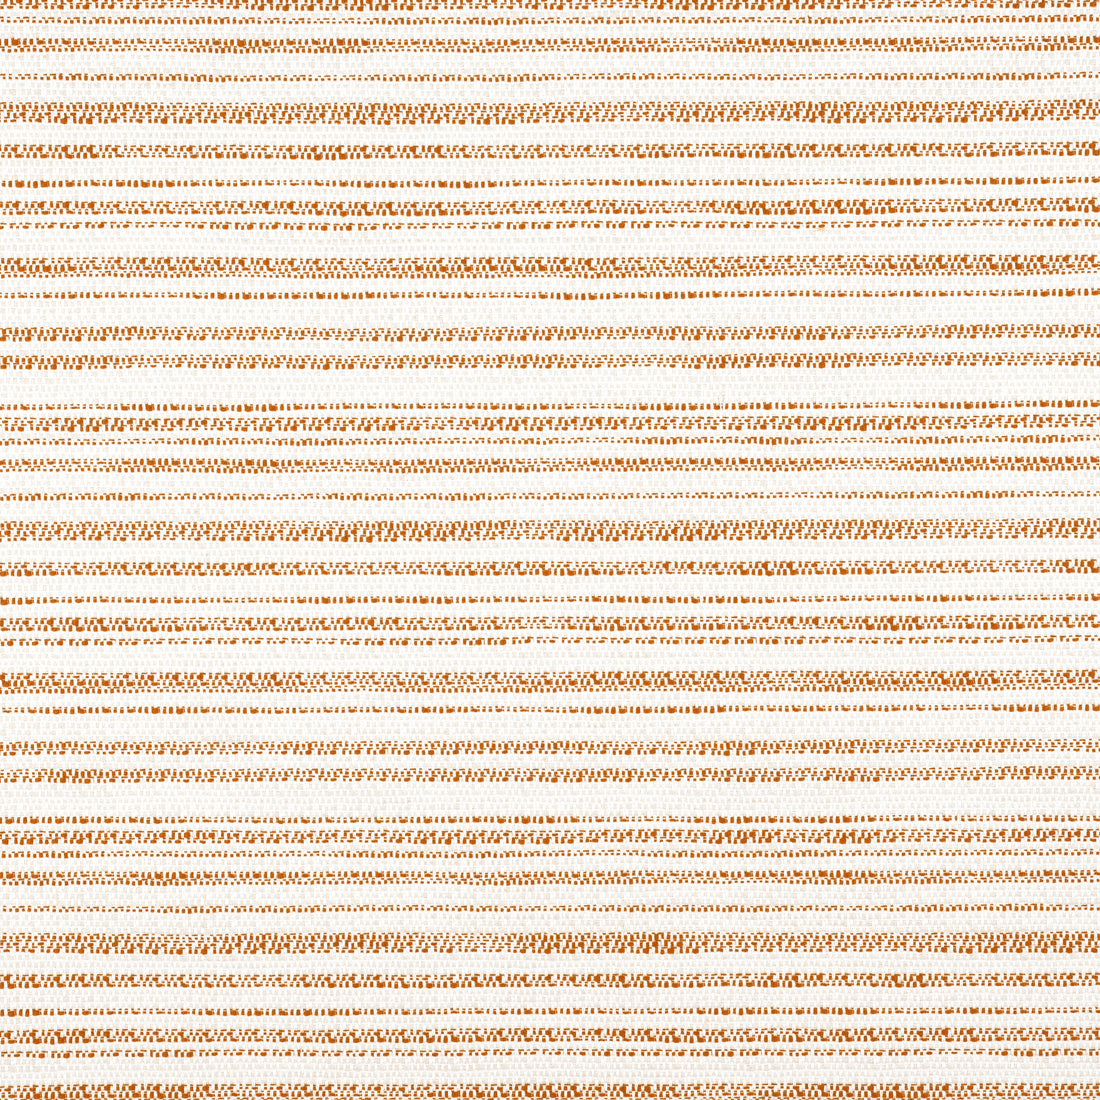 Bellano Stripe fabric in copper color - pattern number W77147 - by Thibaut in the Veneto collection